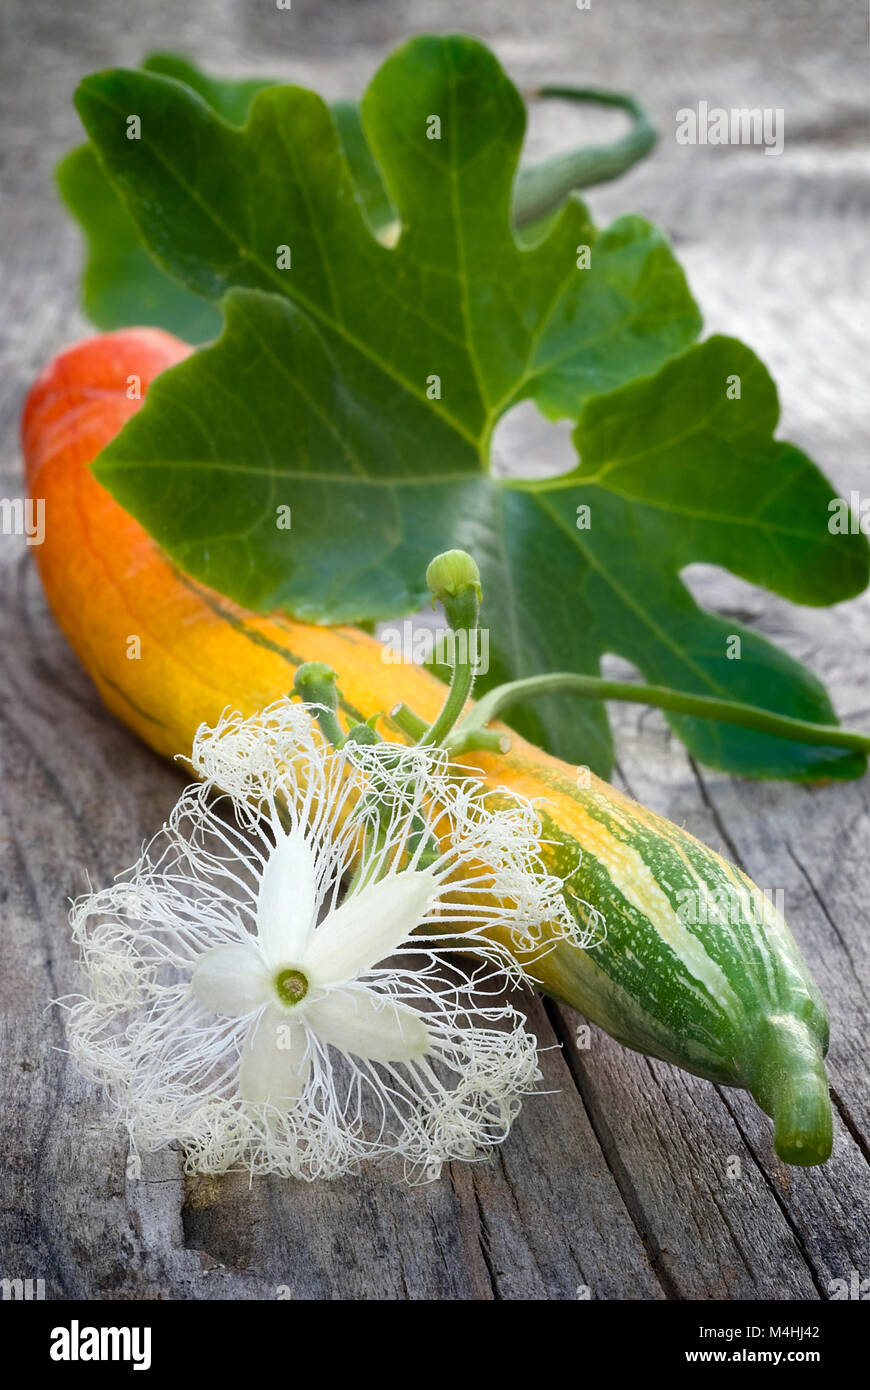 fruits, leaves and flowers of snake gourd (Trichosanthes cucumerina var. anguina) Stock Photo